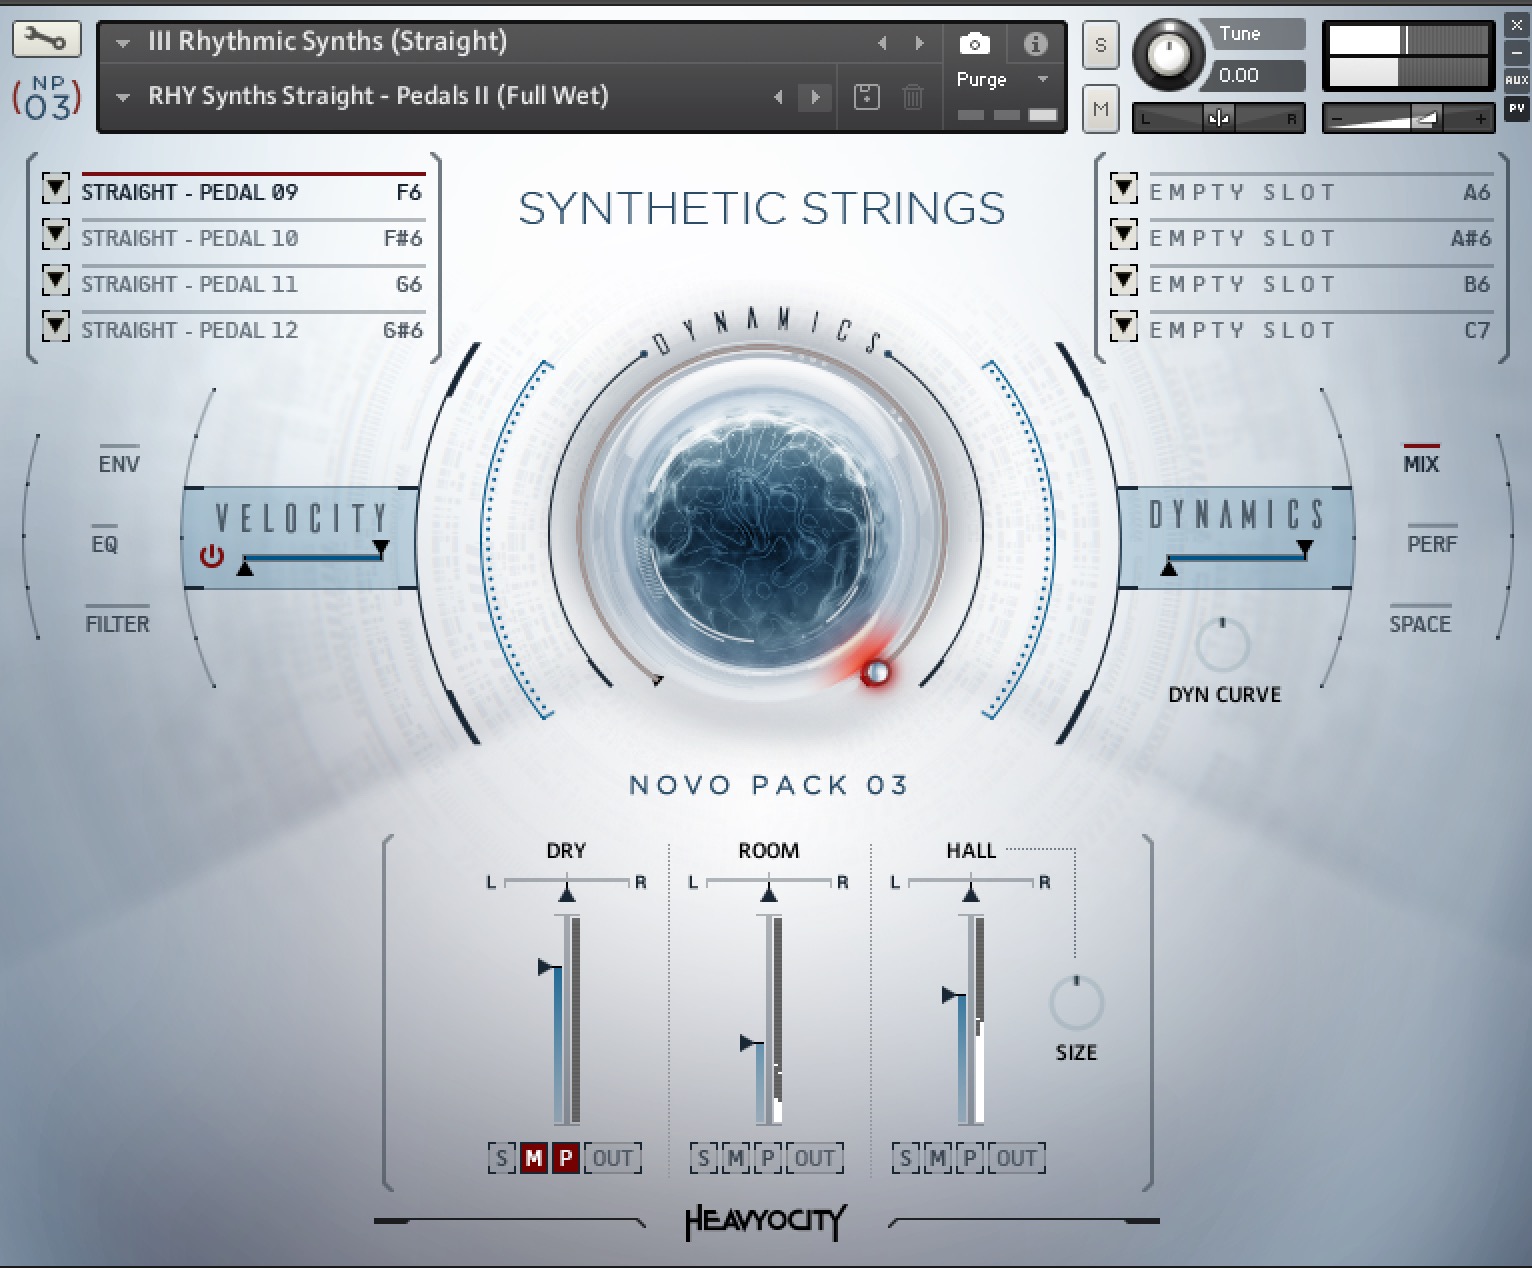 NP03 Synthetic Strings by Heavyocity Media Review III Rhythmic Synths Straight